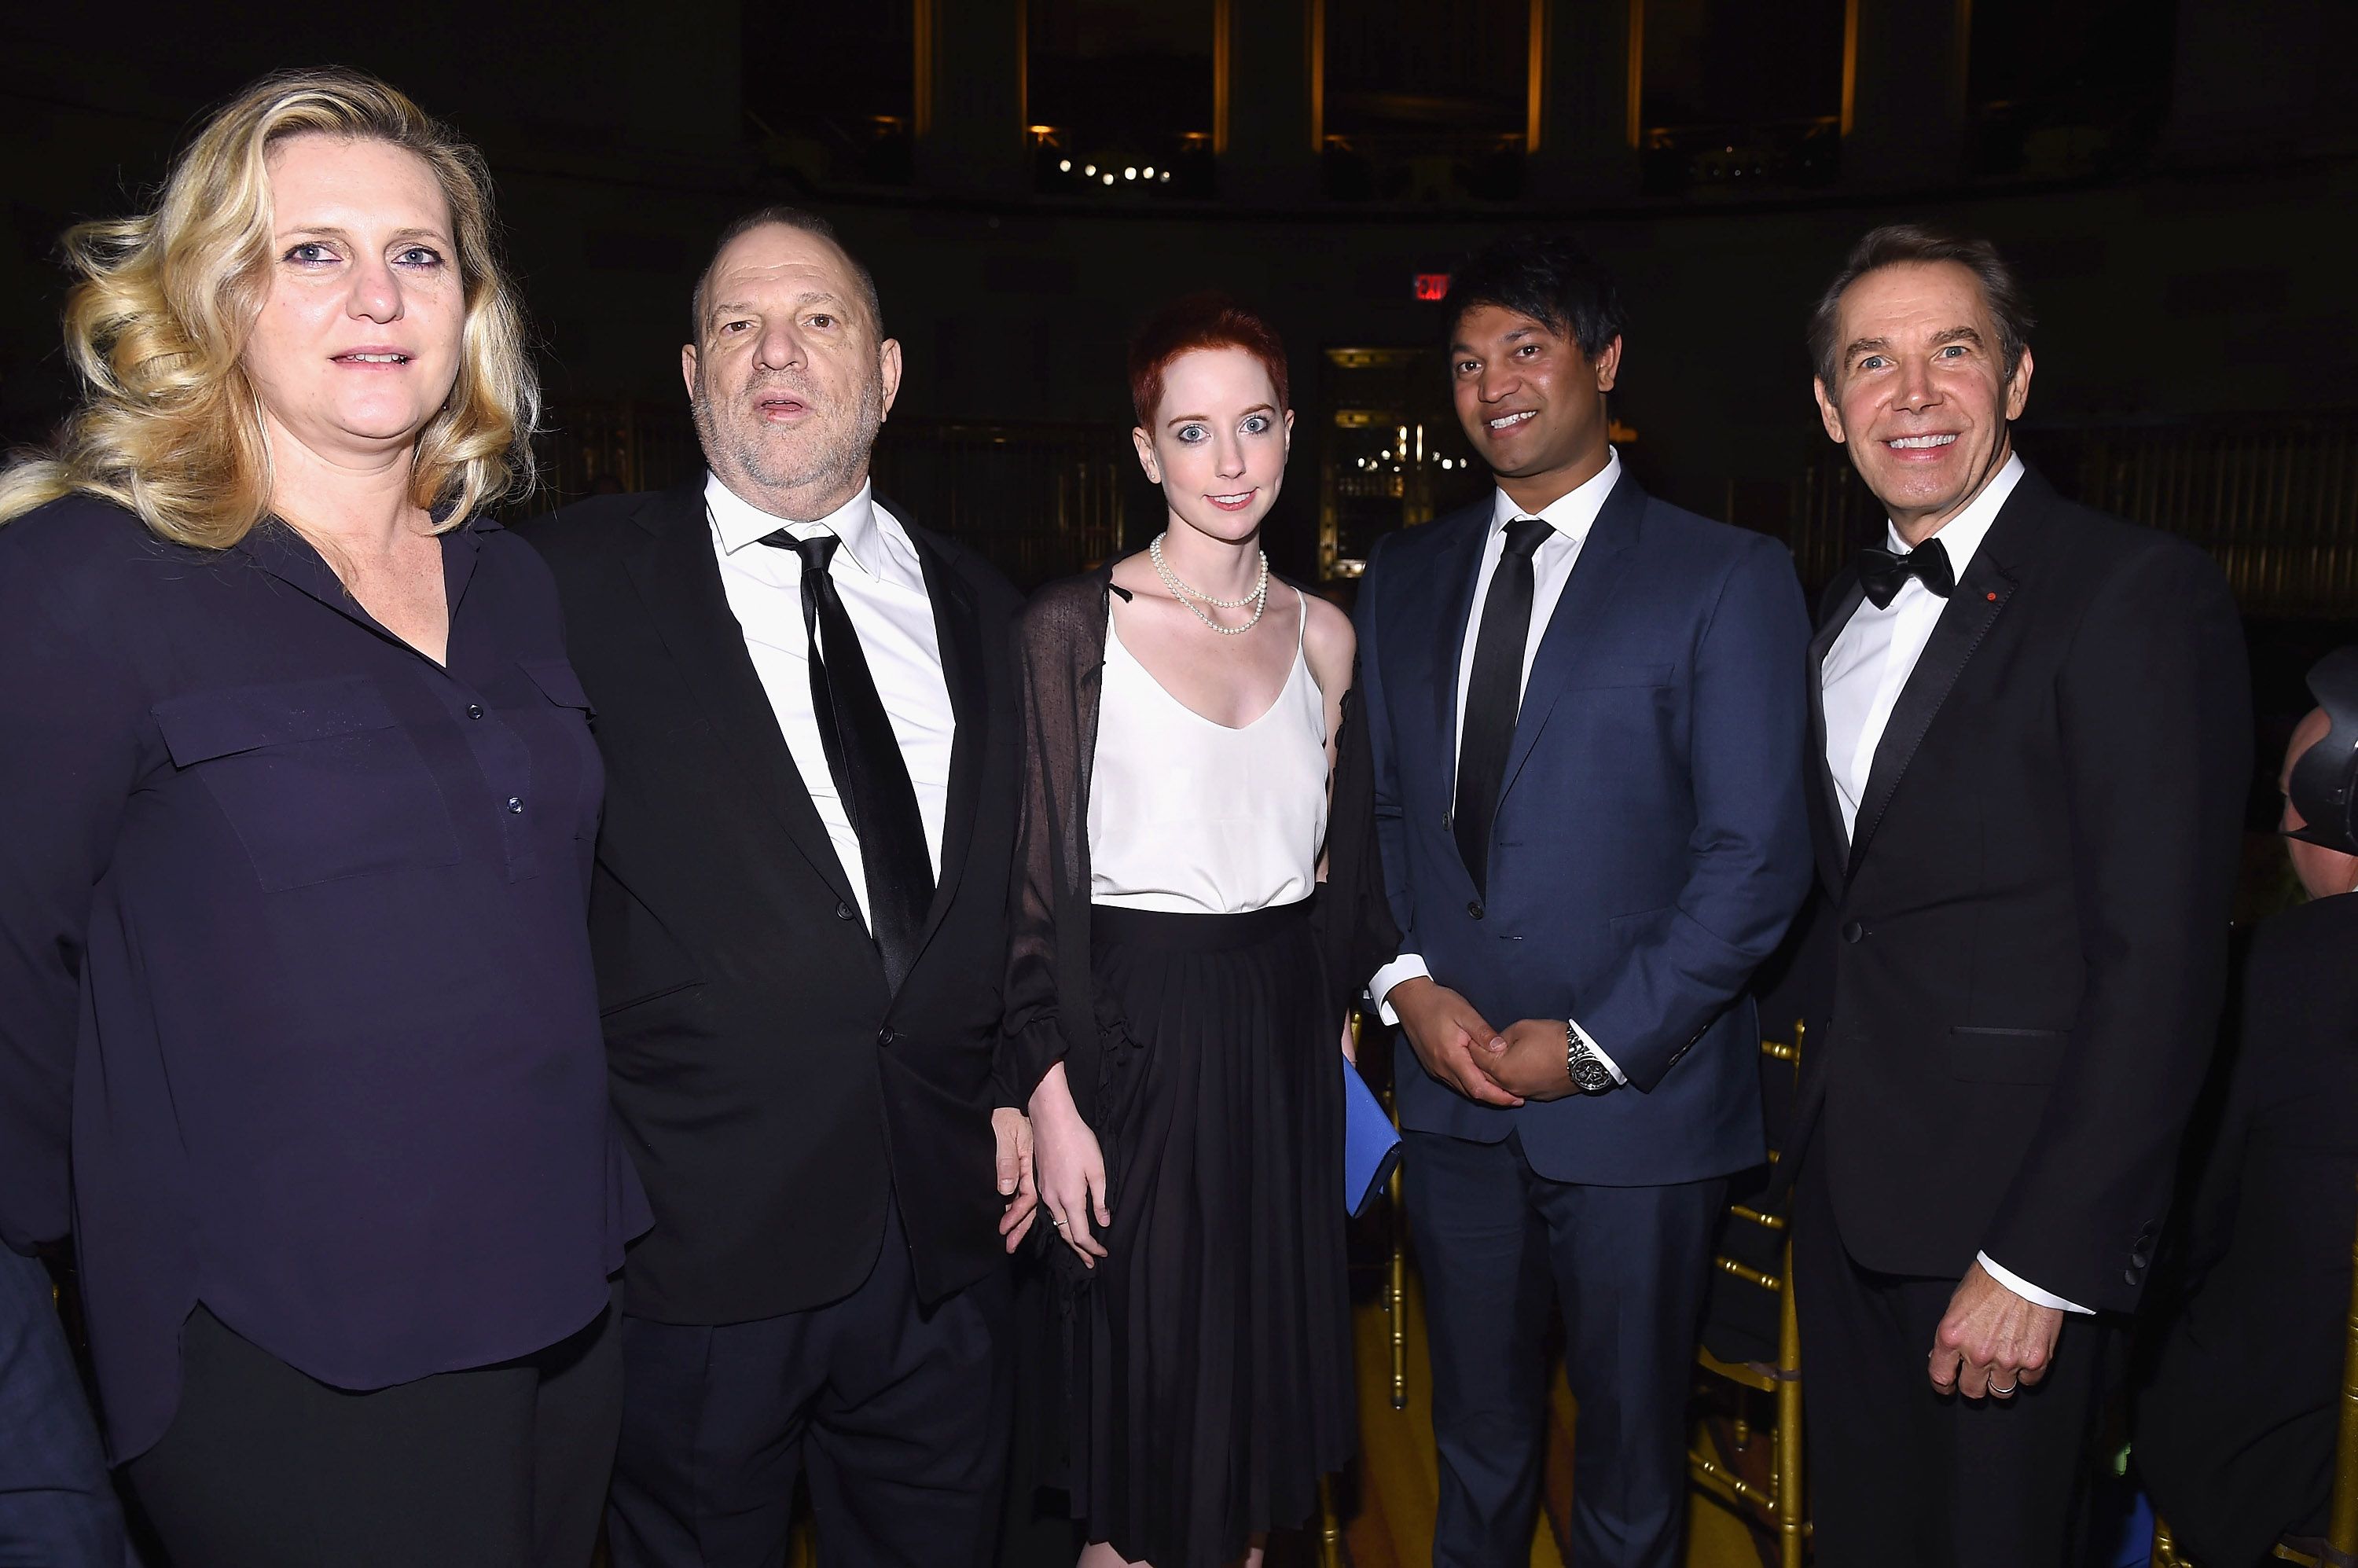 Justine Koons, Harvey Weinstein, Remy Lily Weinstein, Saroo Brierley and Jeff Koons during the International Centre for Missing and Exploited Children's 2017 Gala for Child Protection in New York City. | Source: Getty Images